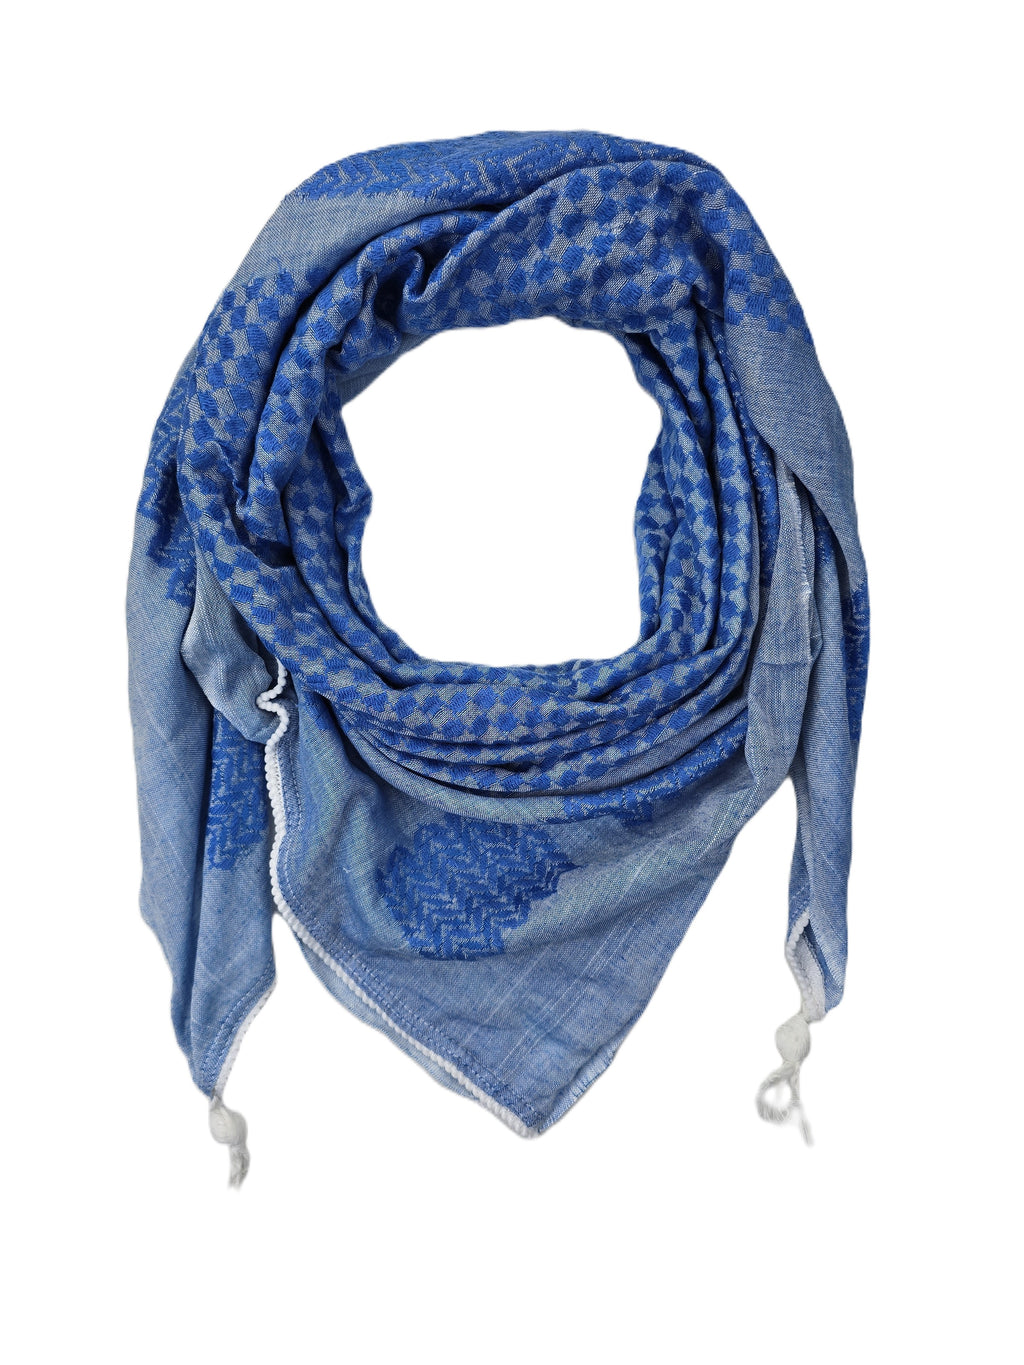 Keffiyeh, Shemagh Scarf Made in Palestine - Gray and Blue